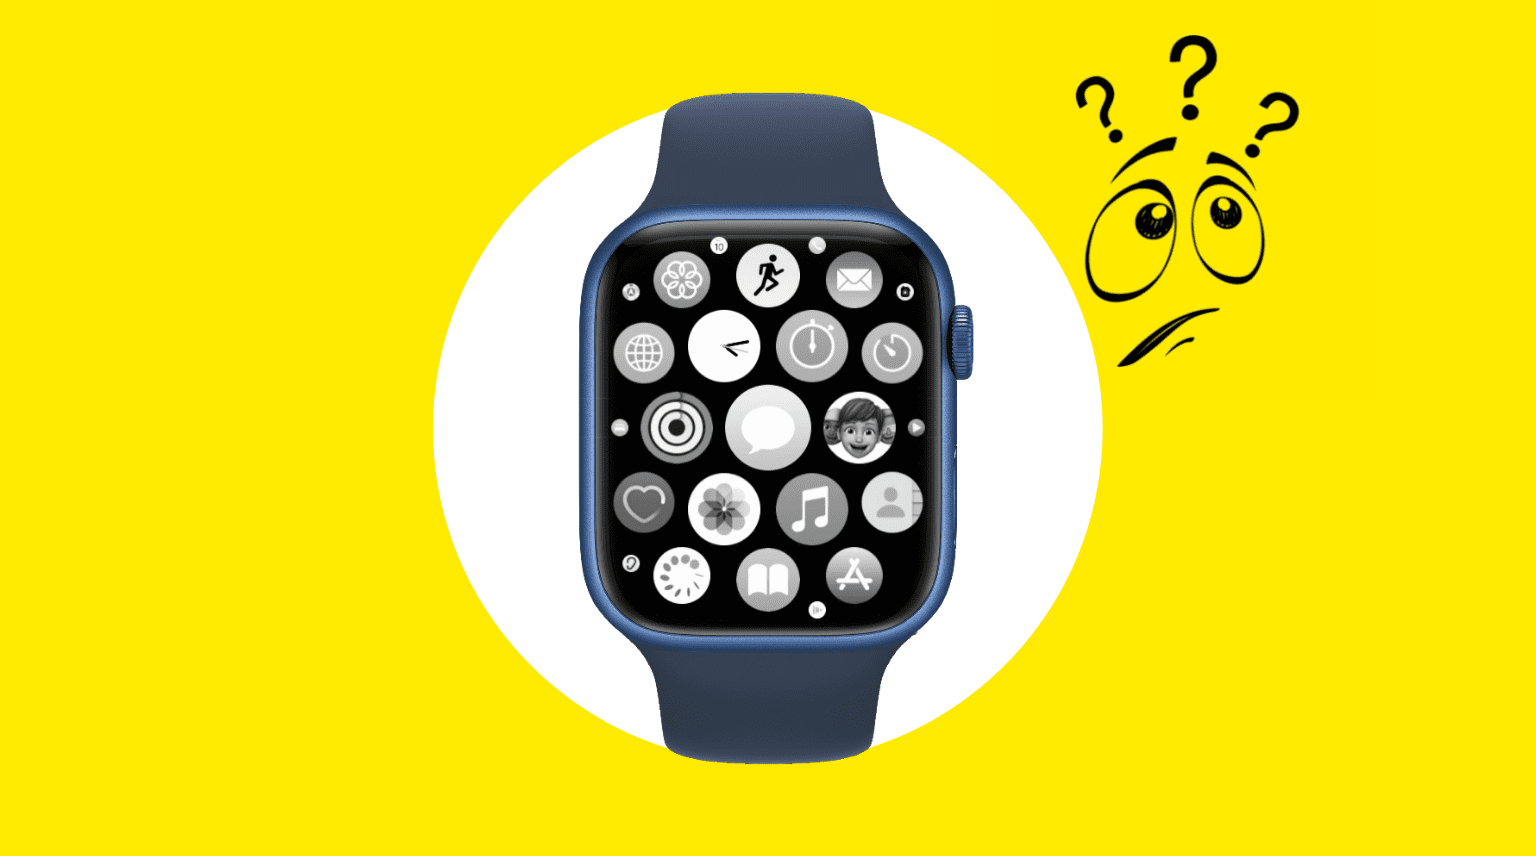 Apple Watch with black and white app bubble on a yellow background with sad face showing apps not working